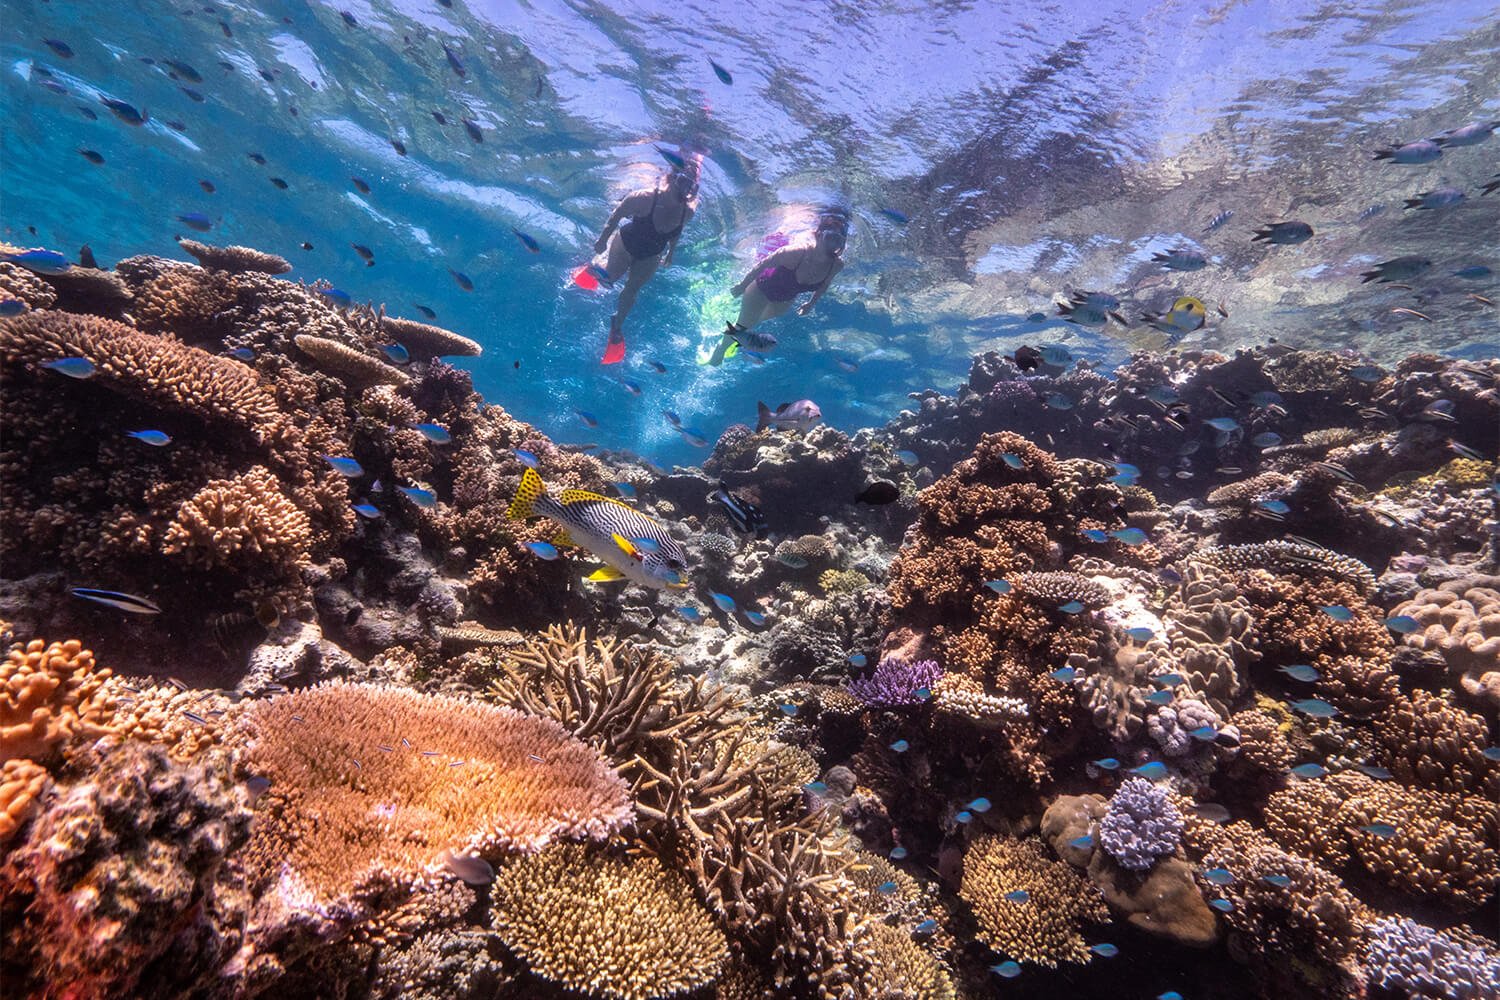 Snorkelling over coral on the Great Barrier Reef